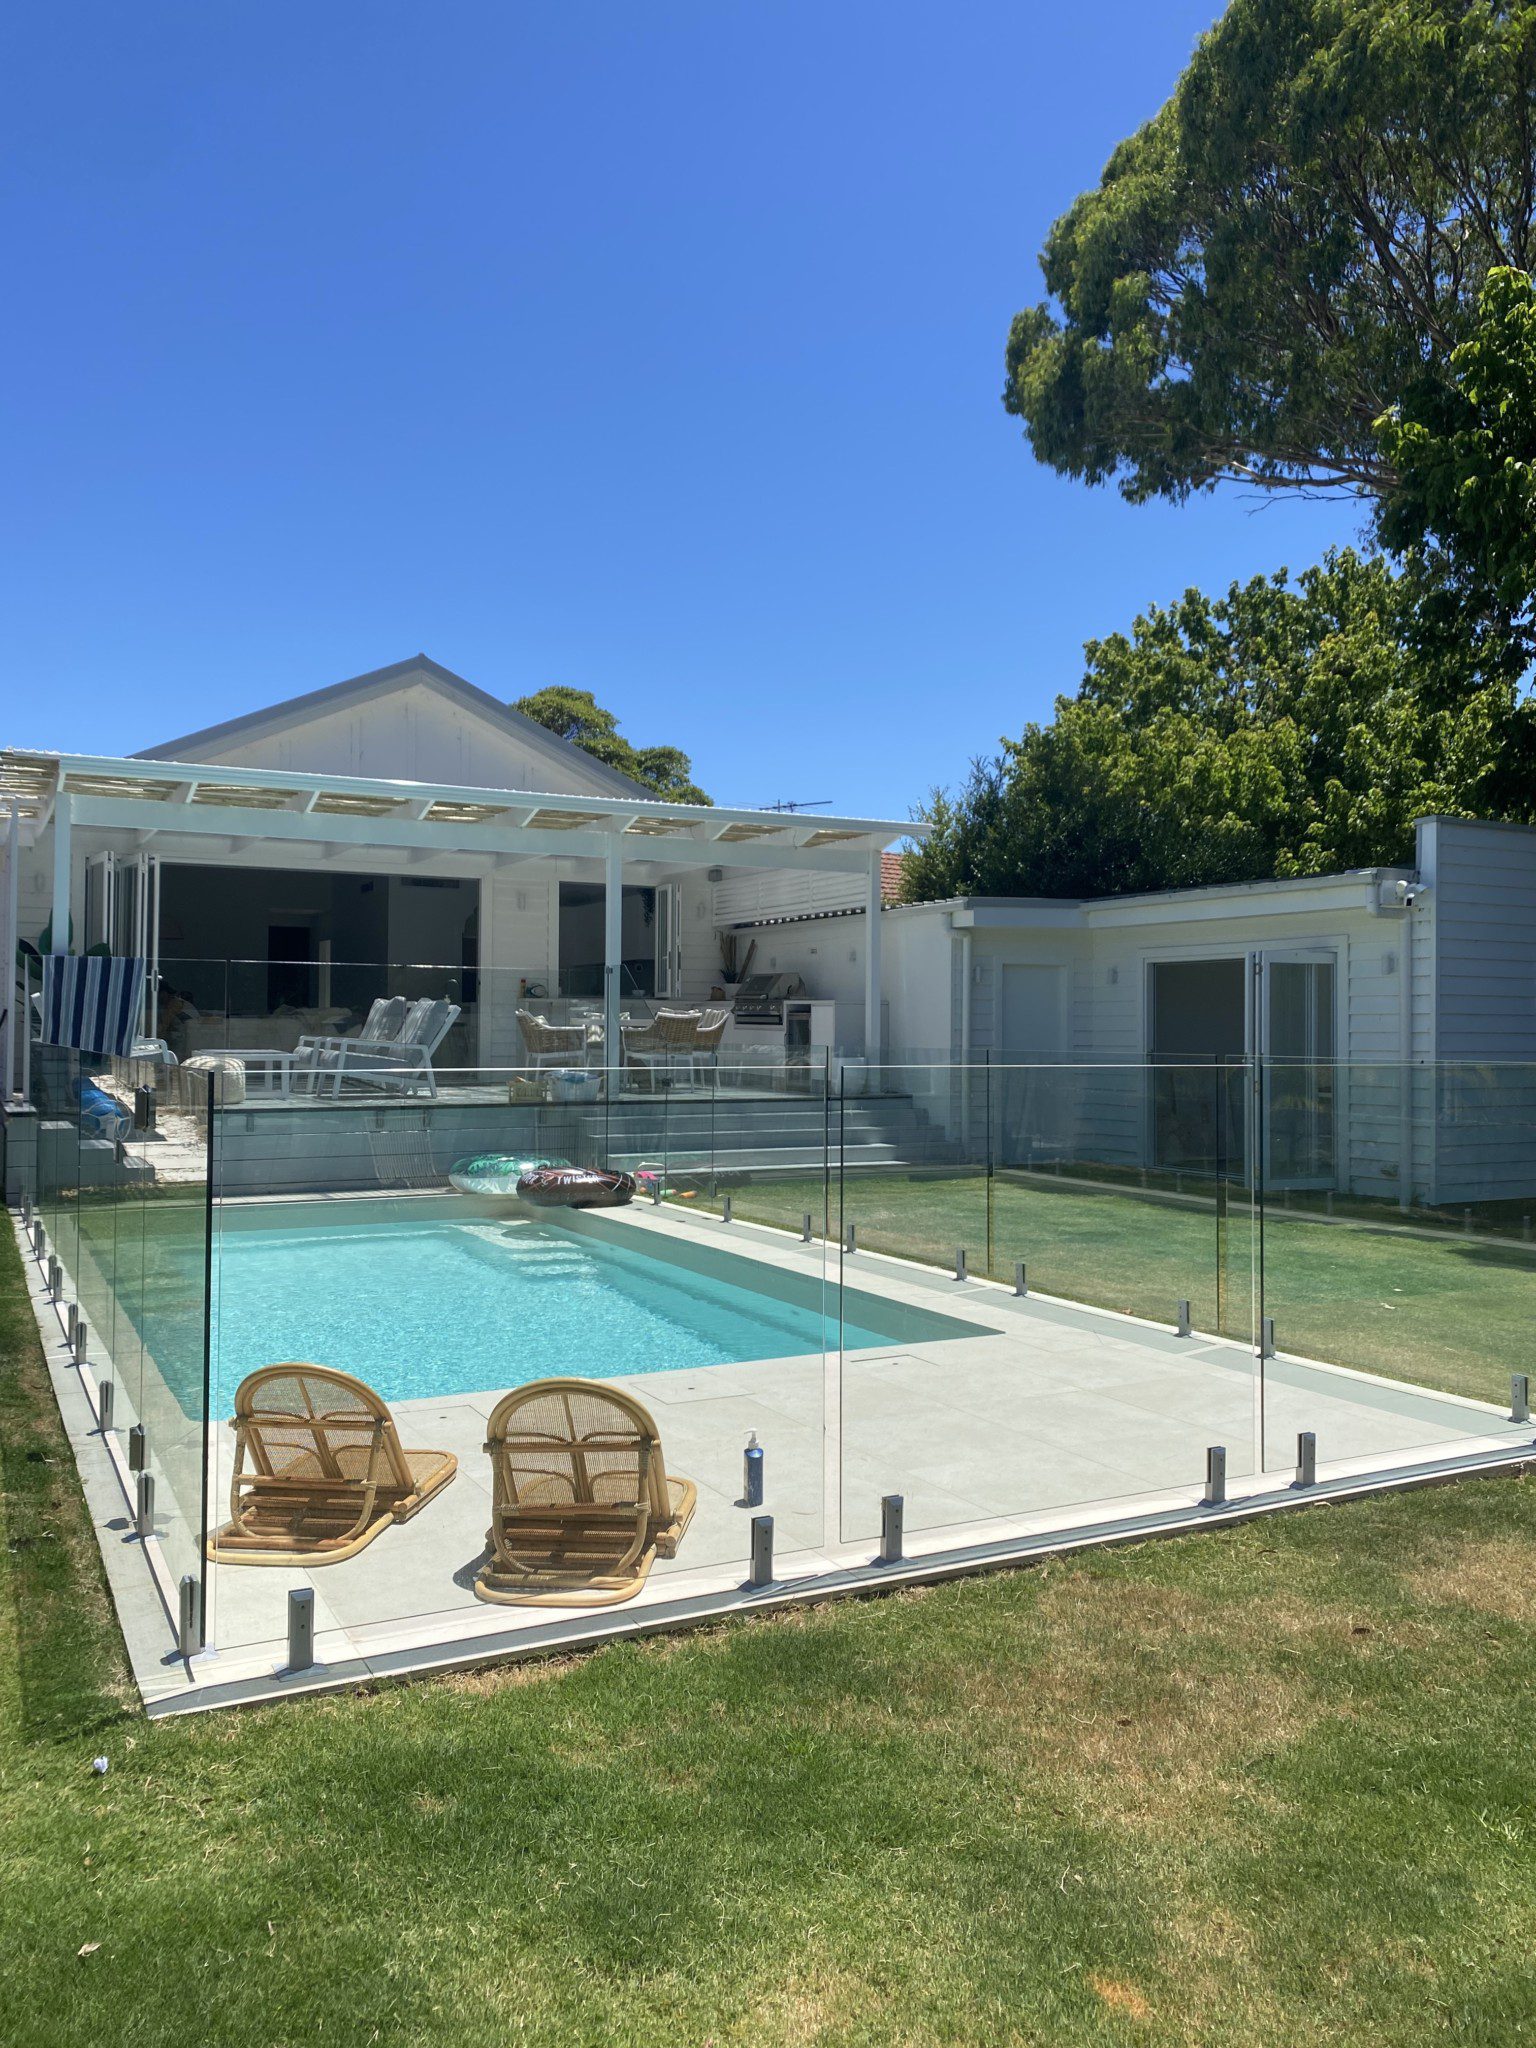 Holiday in Haberfield – Open Plan Out to Palms, Pool, Deck & Garden